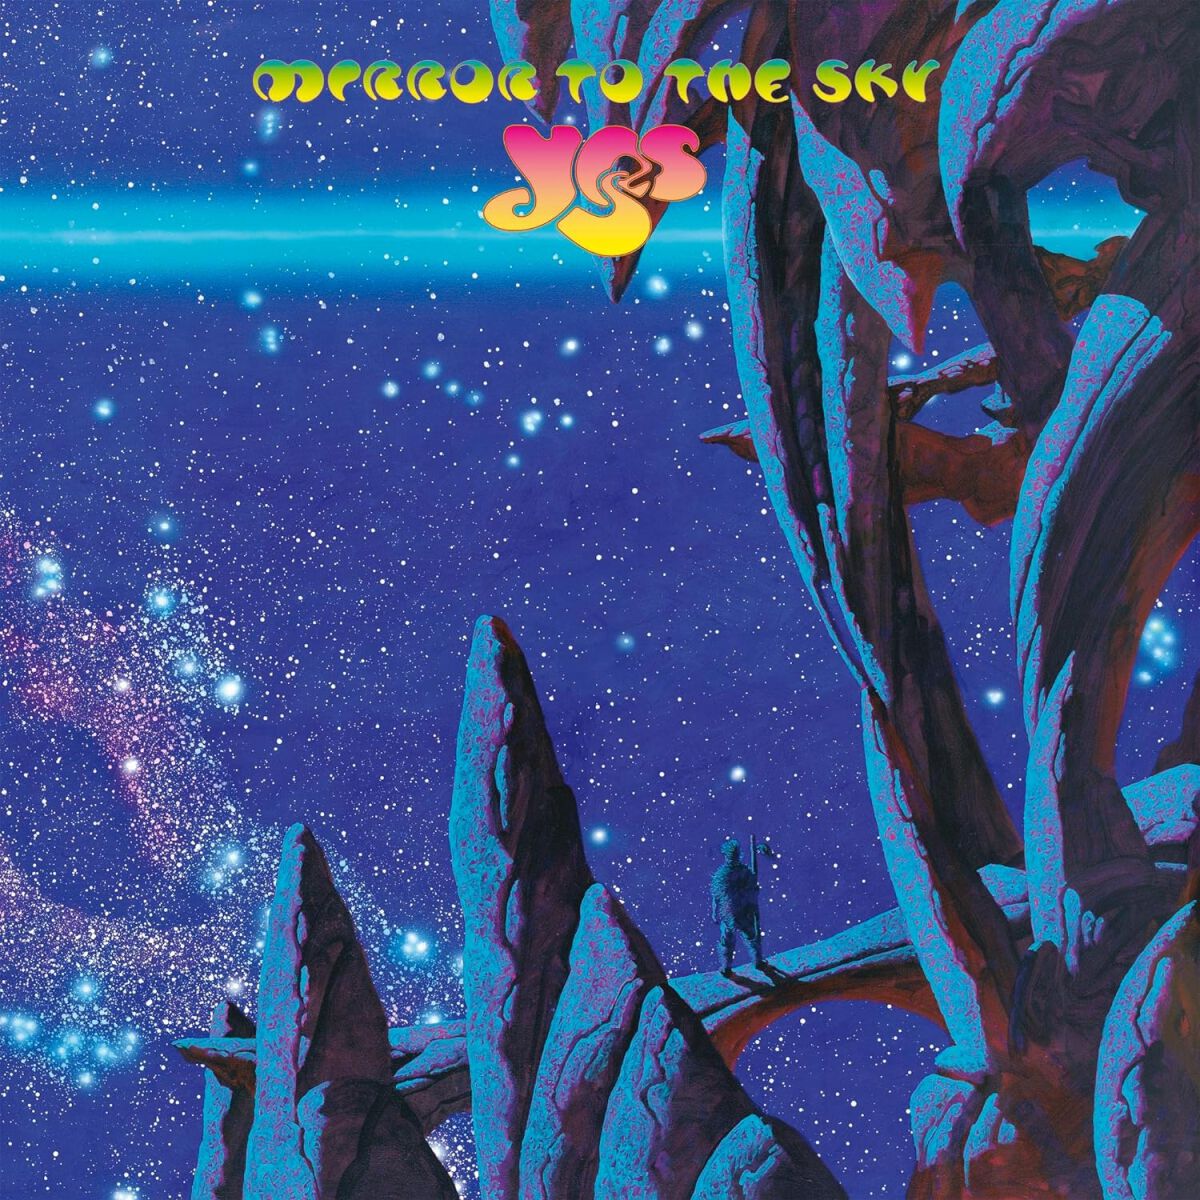 Mirror to the sky von Yes - 2-CD & Blu-ray (Digipak, Limited Edition, Re-Release) von Yes